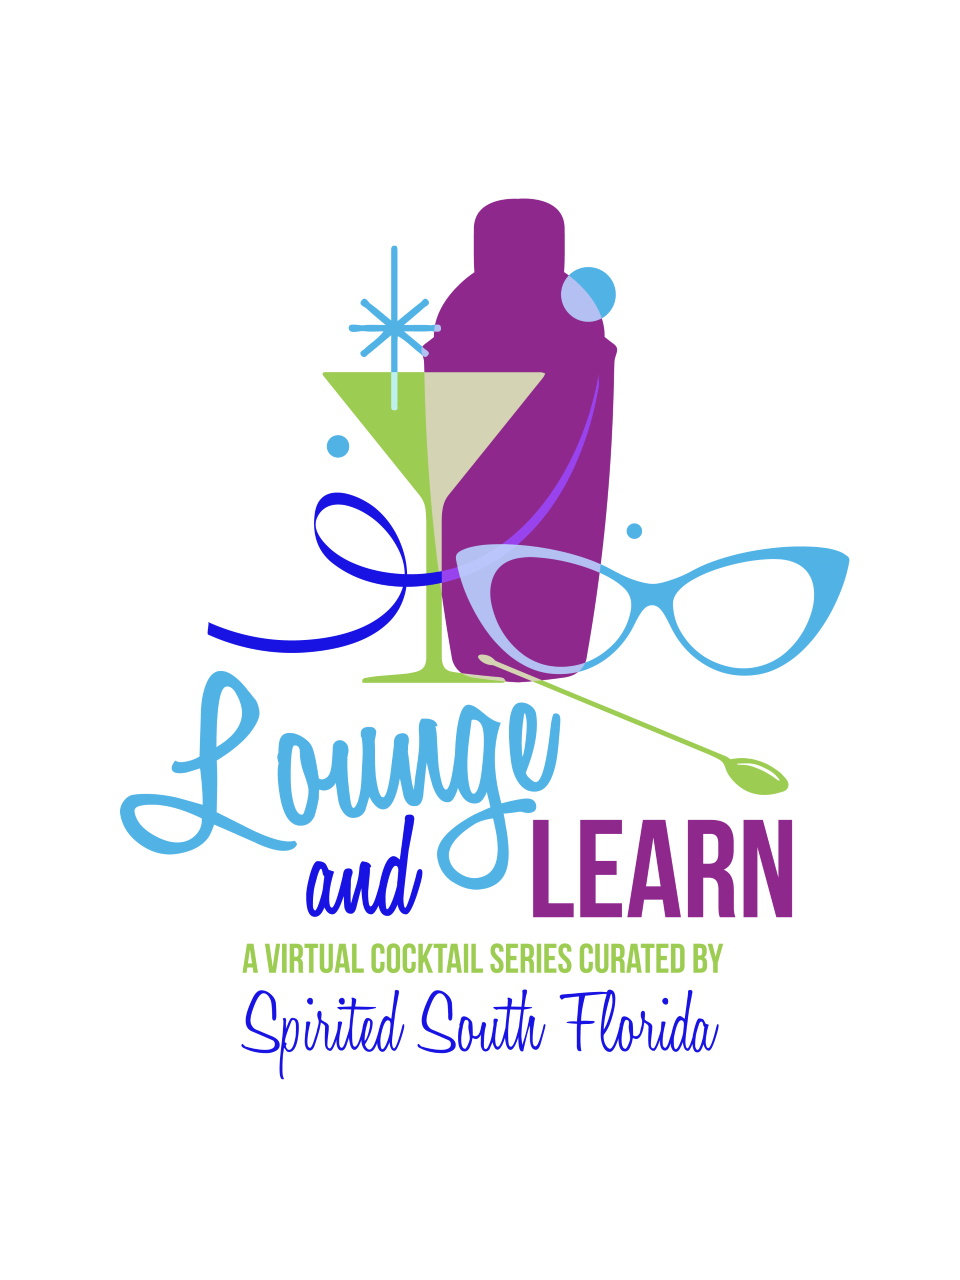 Lounge and Learn - A Virtual Cocktail Series Curated By Spirited South Florida